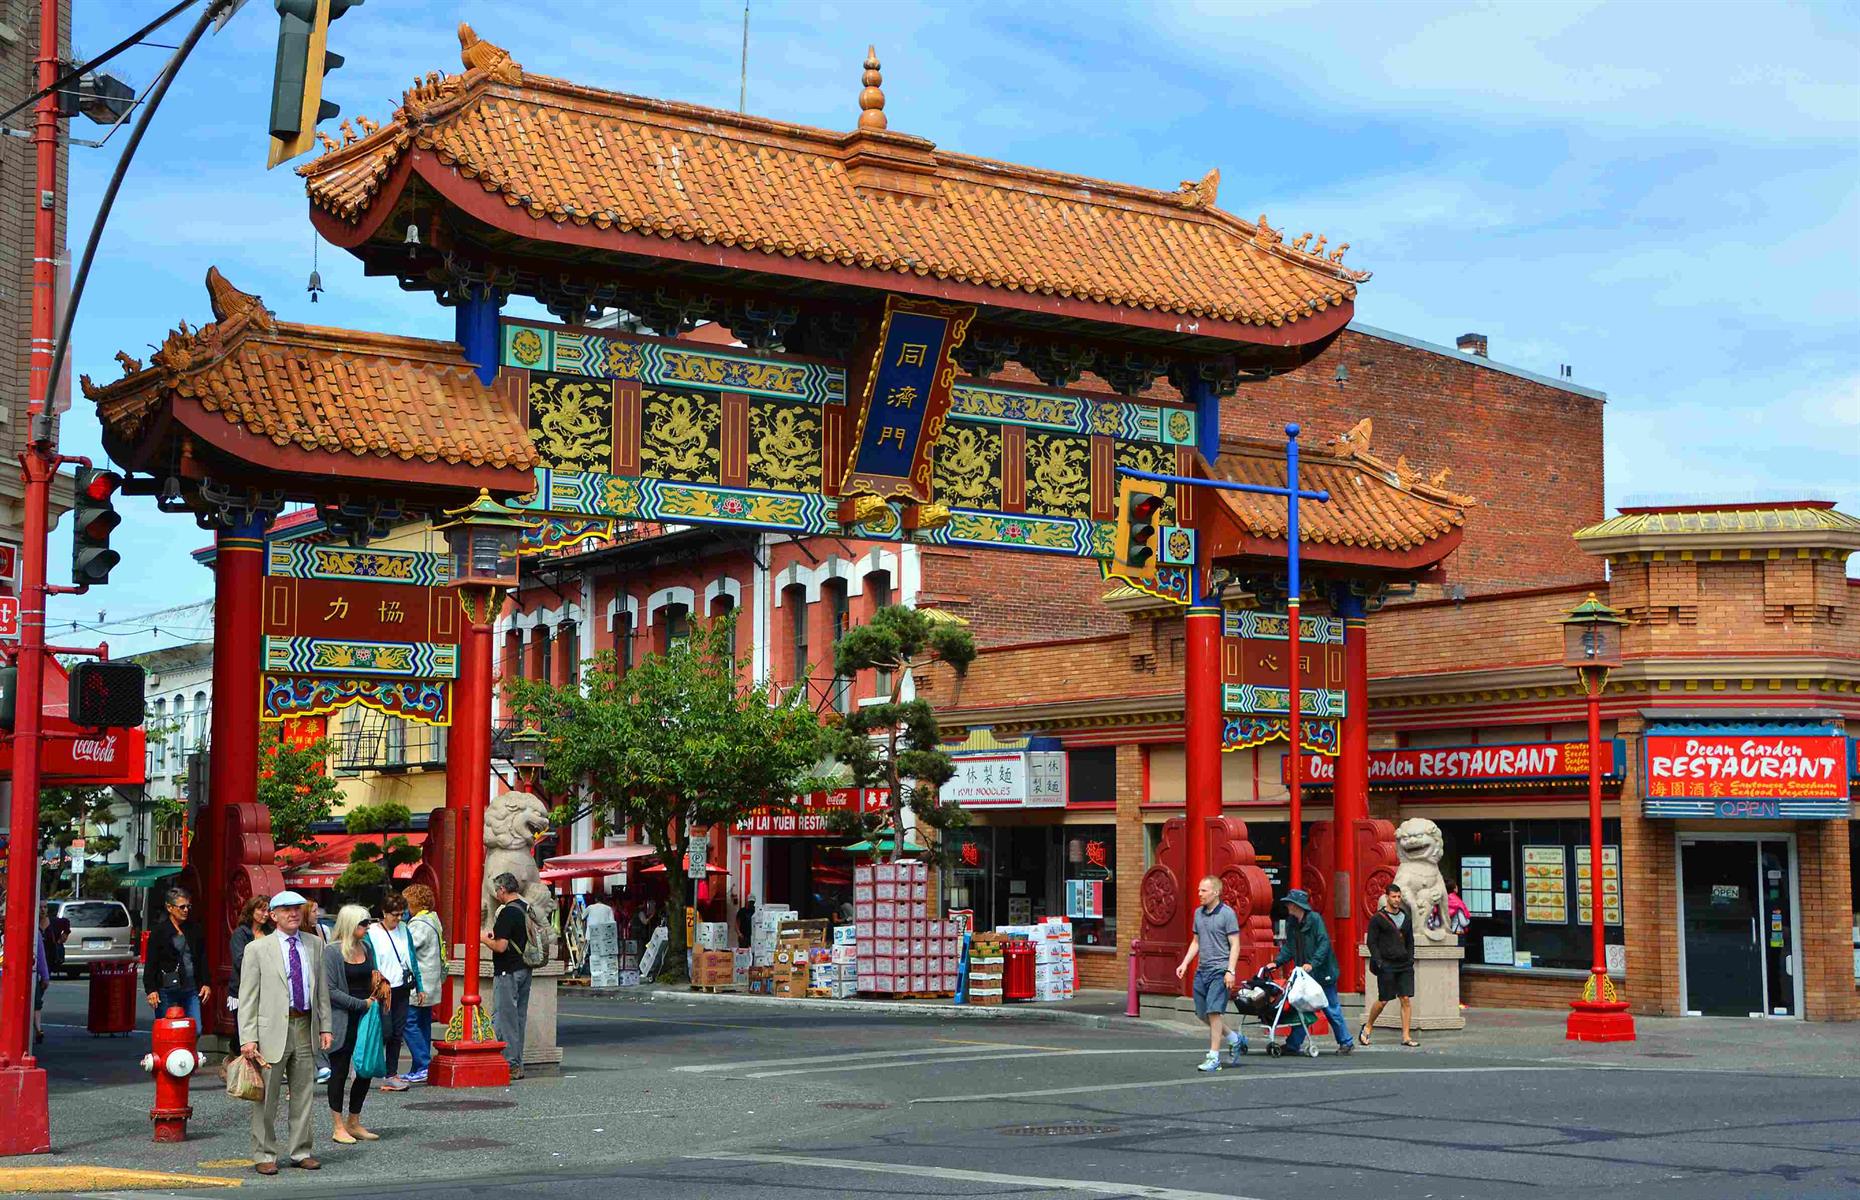 <p>BC’s capital city of Victoria is known for its British influences, but a different cultural experience lies just a short walk from the city’s famous harborfront. Founded more than 150 years ago, this is the oldest <a href="https://www.hellobc.com/stories/exploring-victorias-chinatown/">Chinatown</a> in Canada and the second oldest in North America. Heralded by the ornate Gate of Harmonious Interest, the businesses within Chinatown are diverse, with record stores, coffee shops and, of course, restaurants.</p>